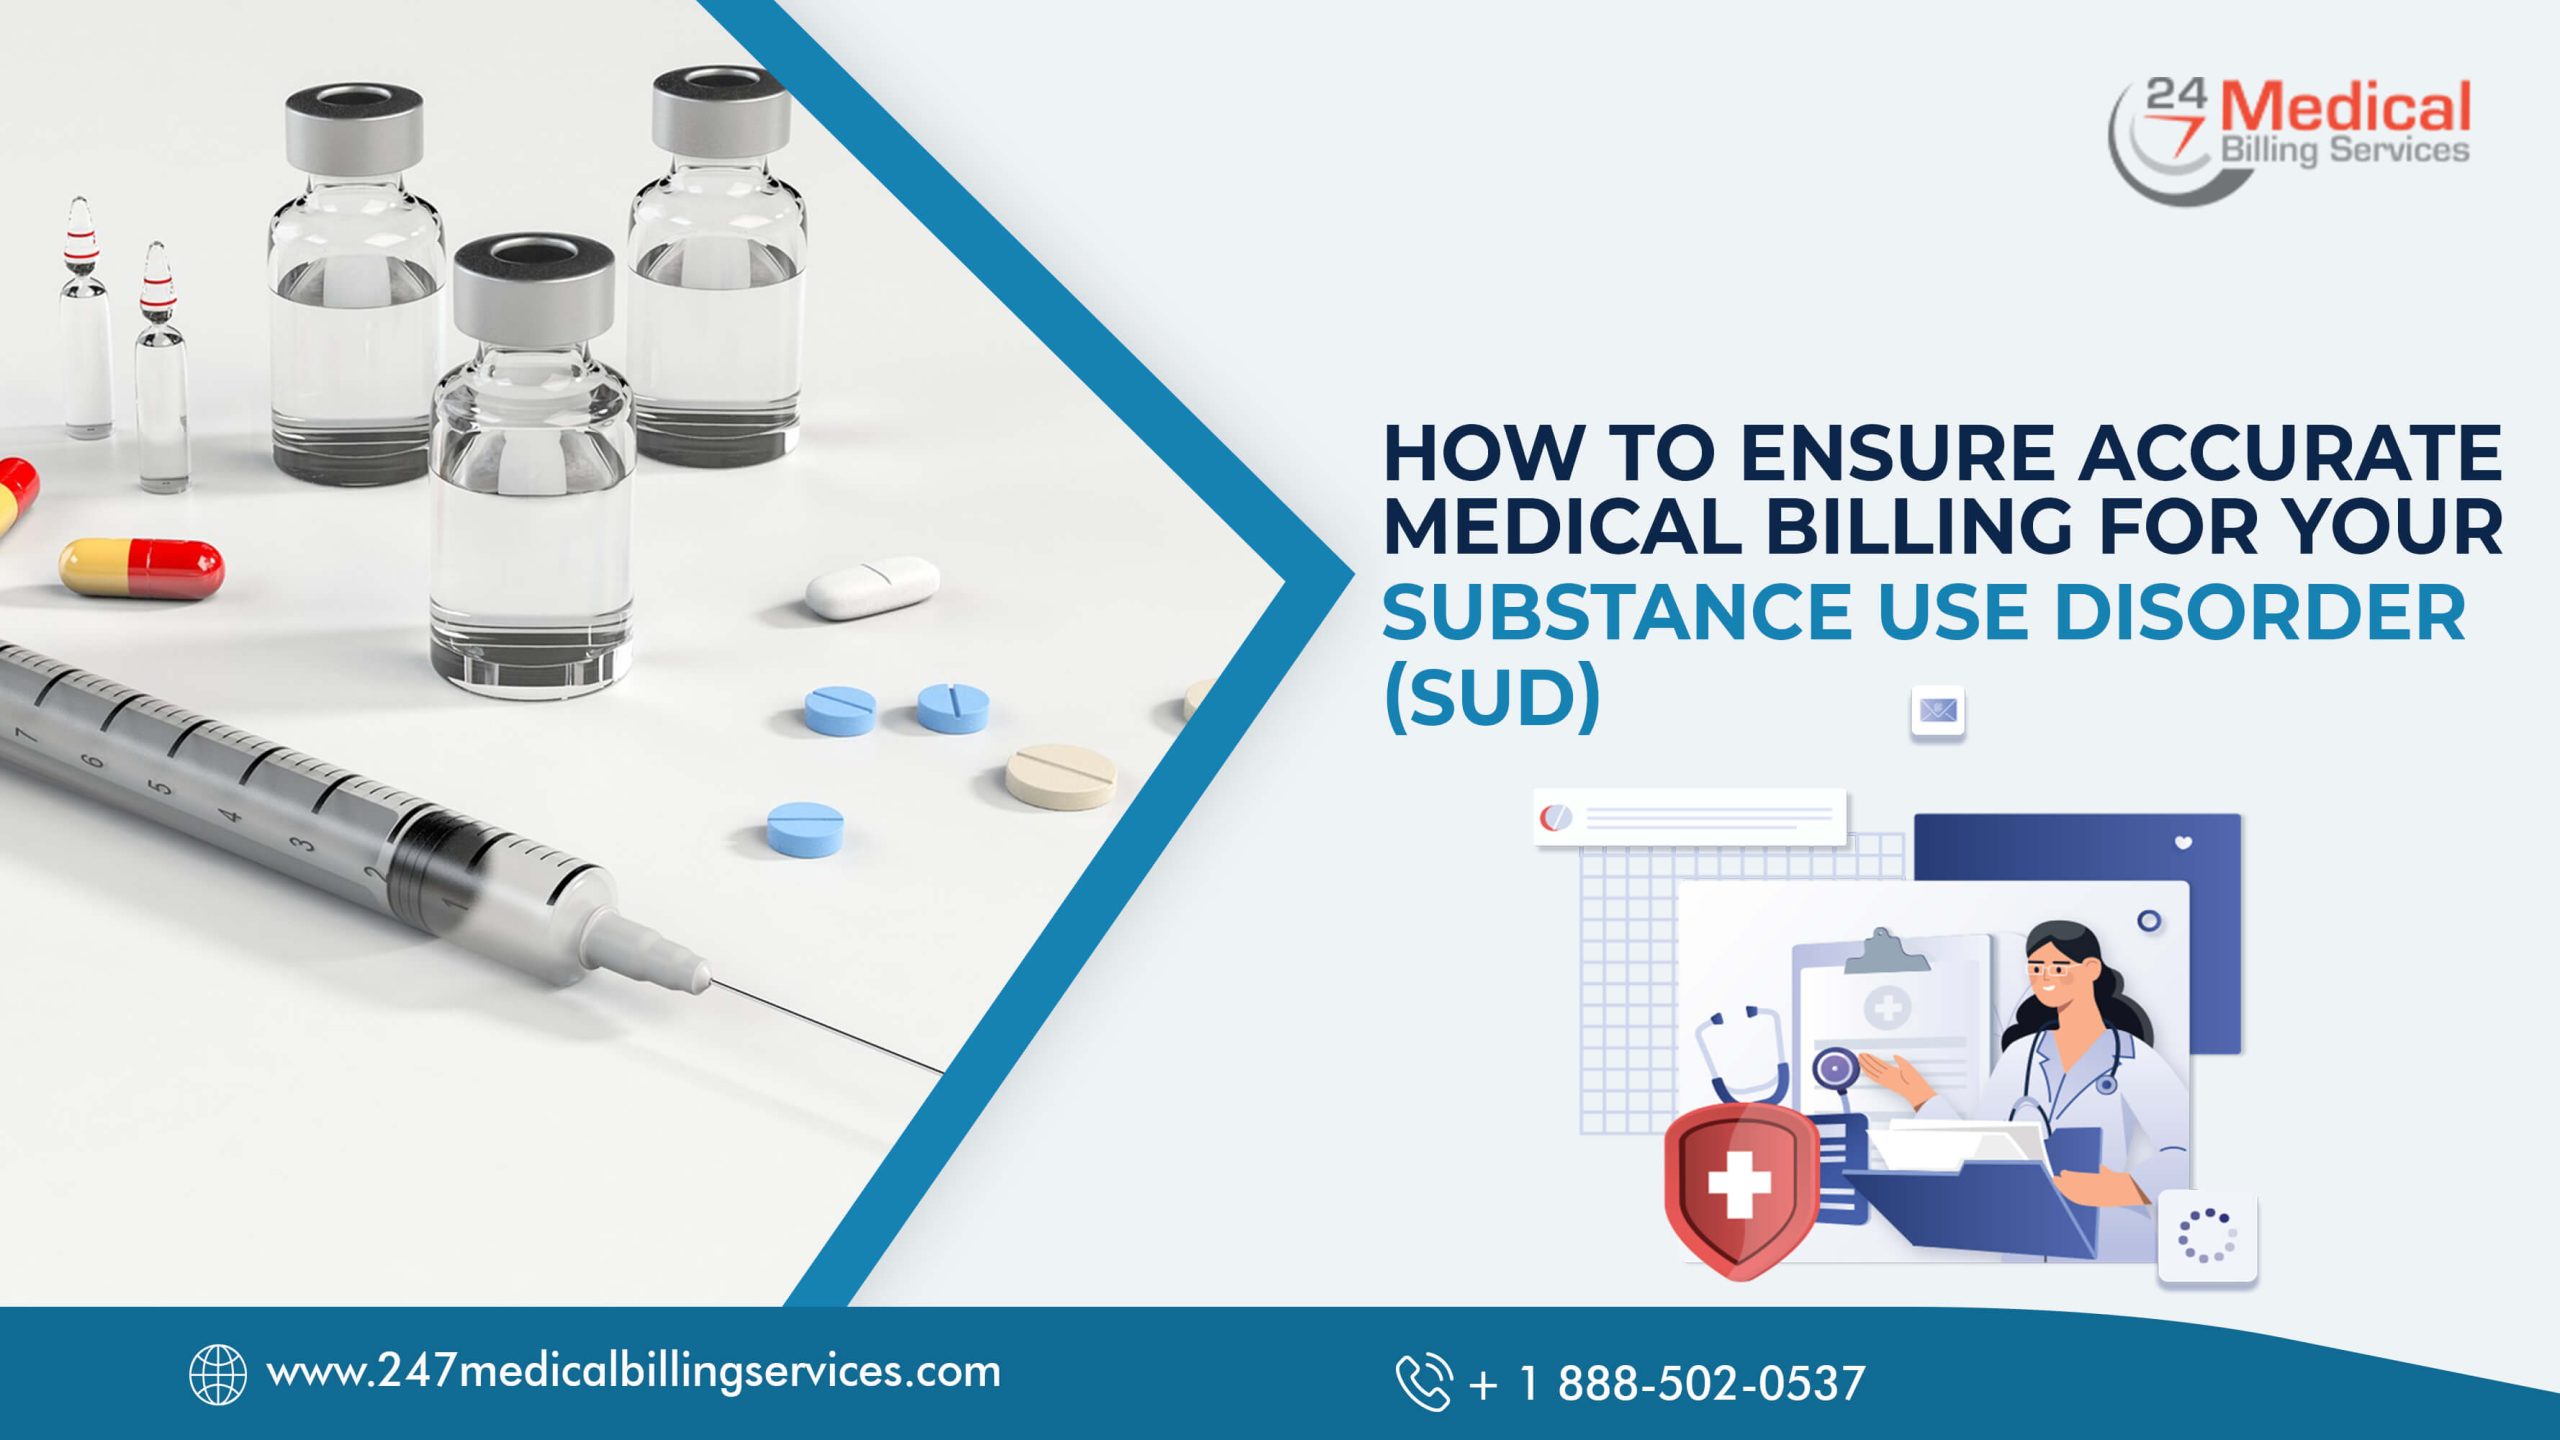  How to Ensure Accurate Medical Billing for Your Substance Use Disorder (SUD)